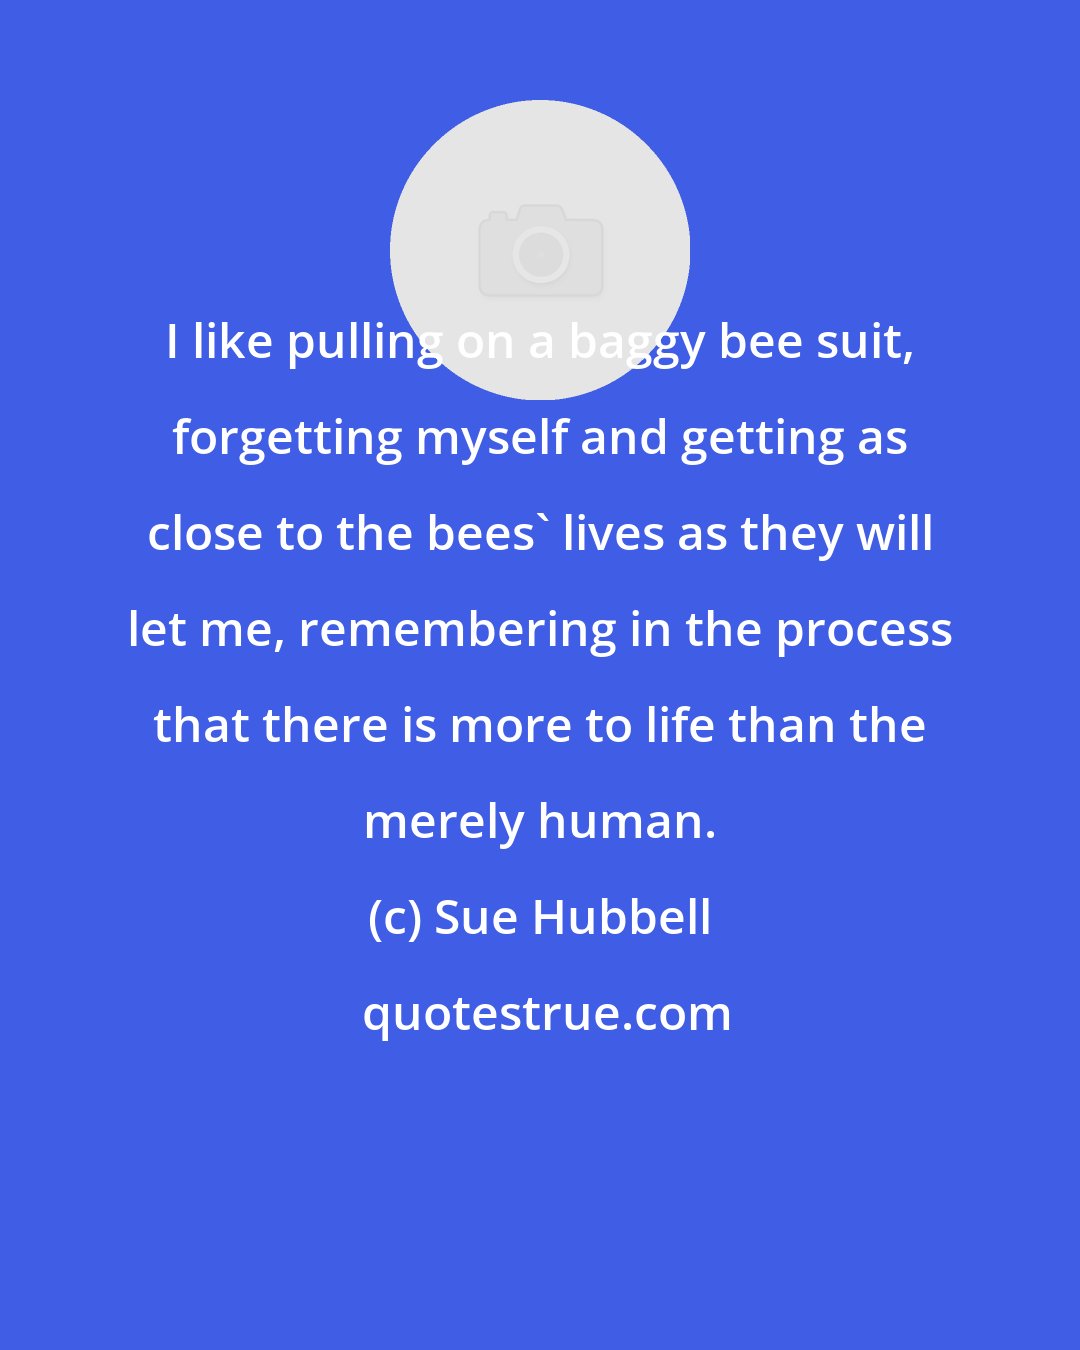 Sue Hubbell: I like pulling on a baggy bee suit, forgetting myself and getting as close to the bees' lives as they will let me, remembering in the process that there is more to life than the merely human.